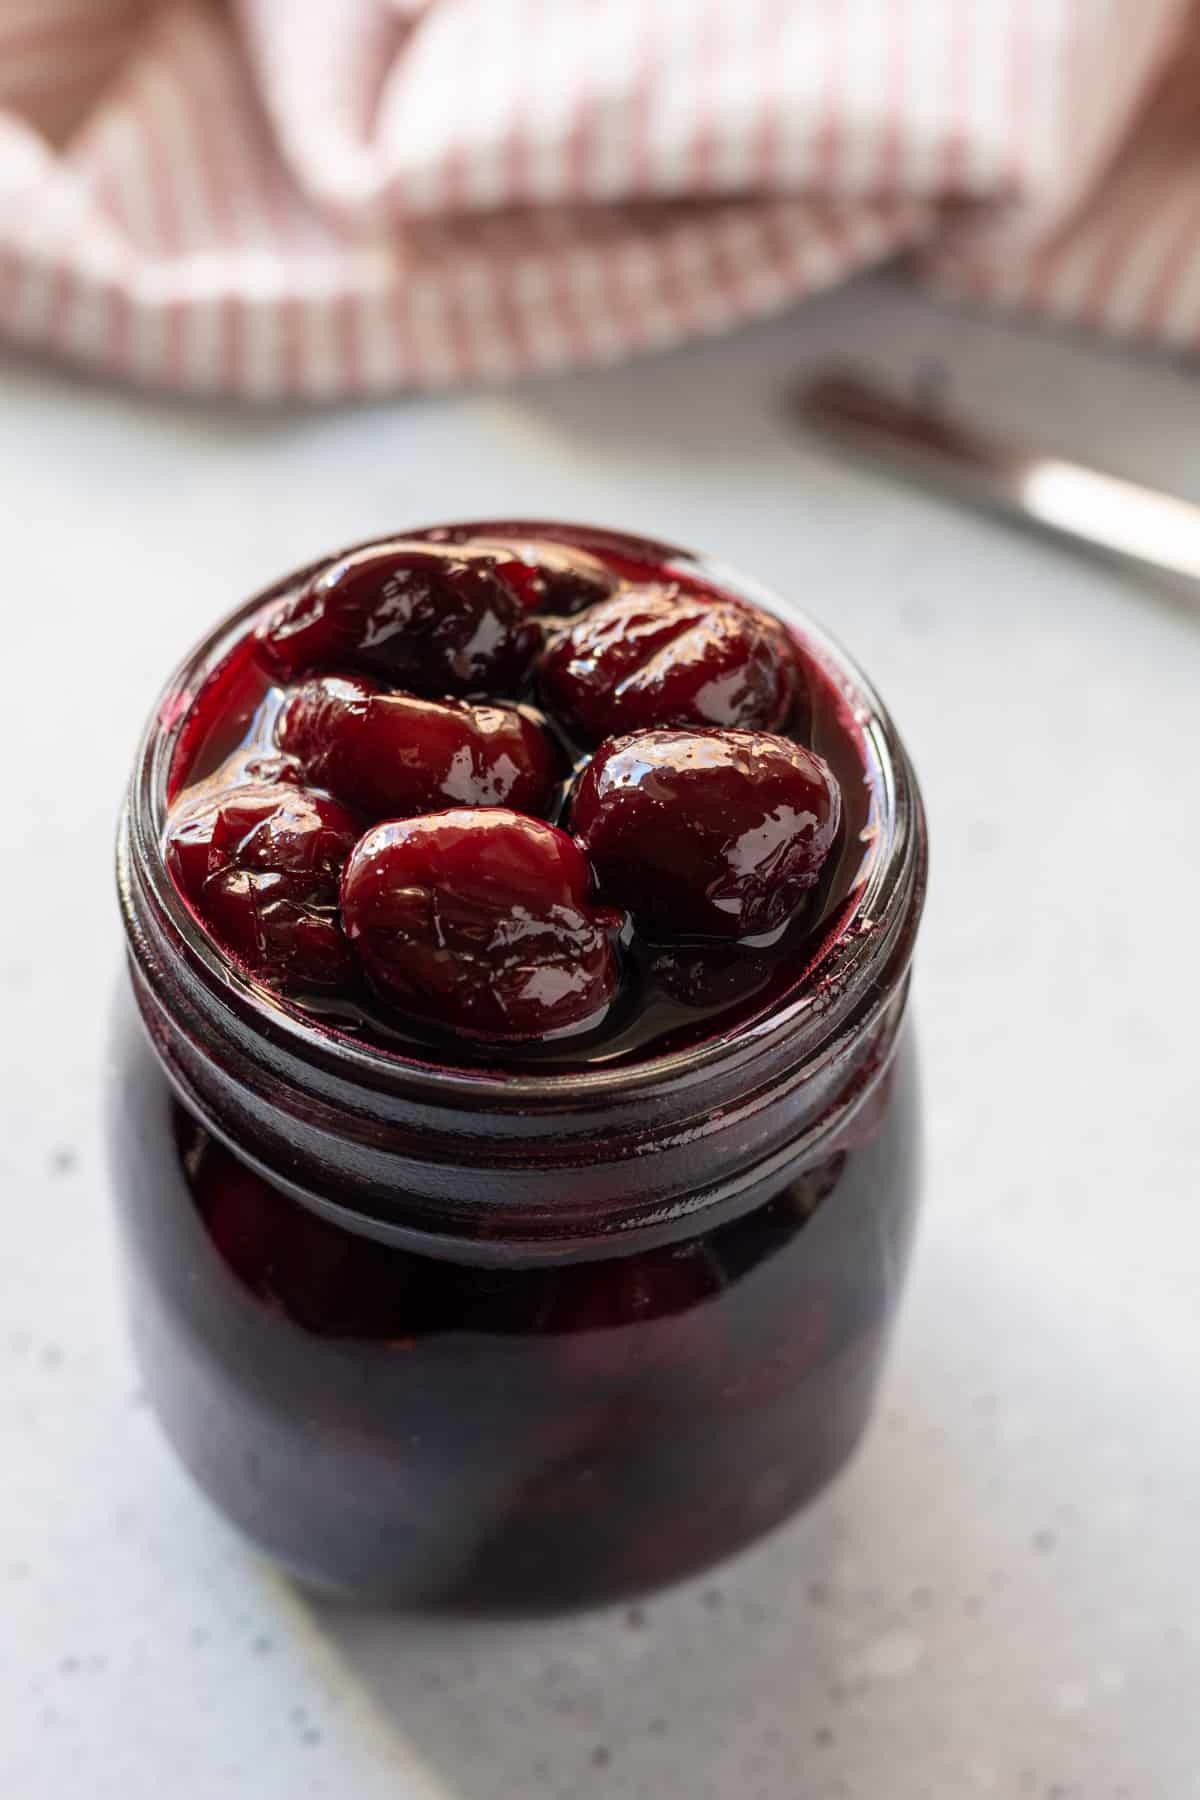 A jar of cherry compote.